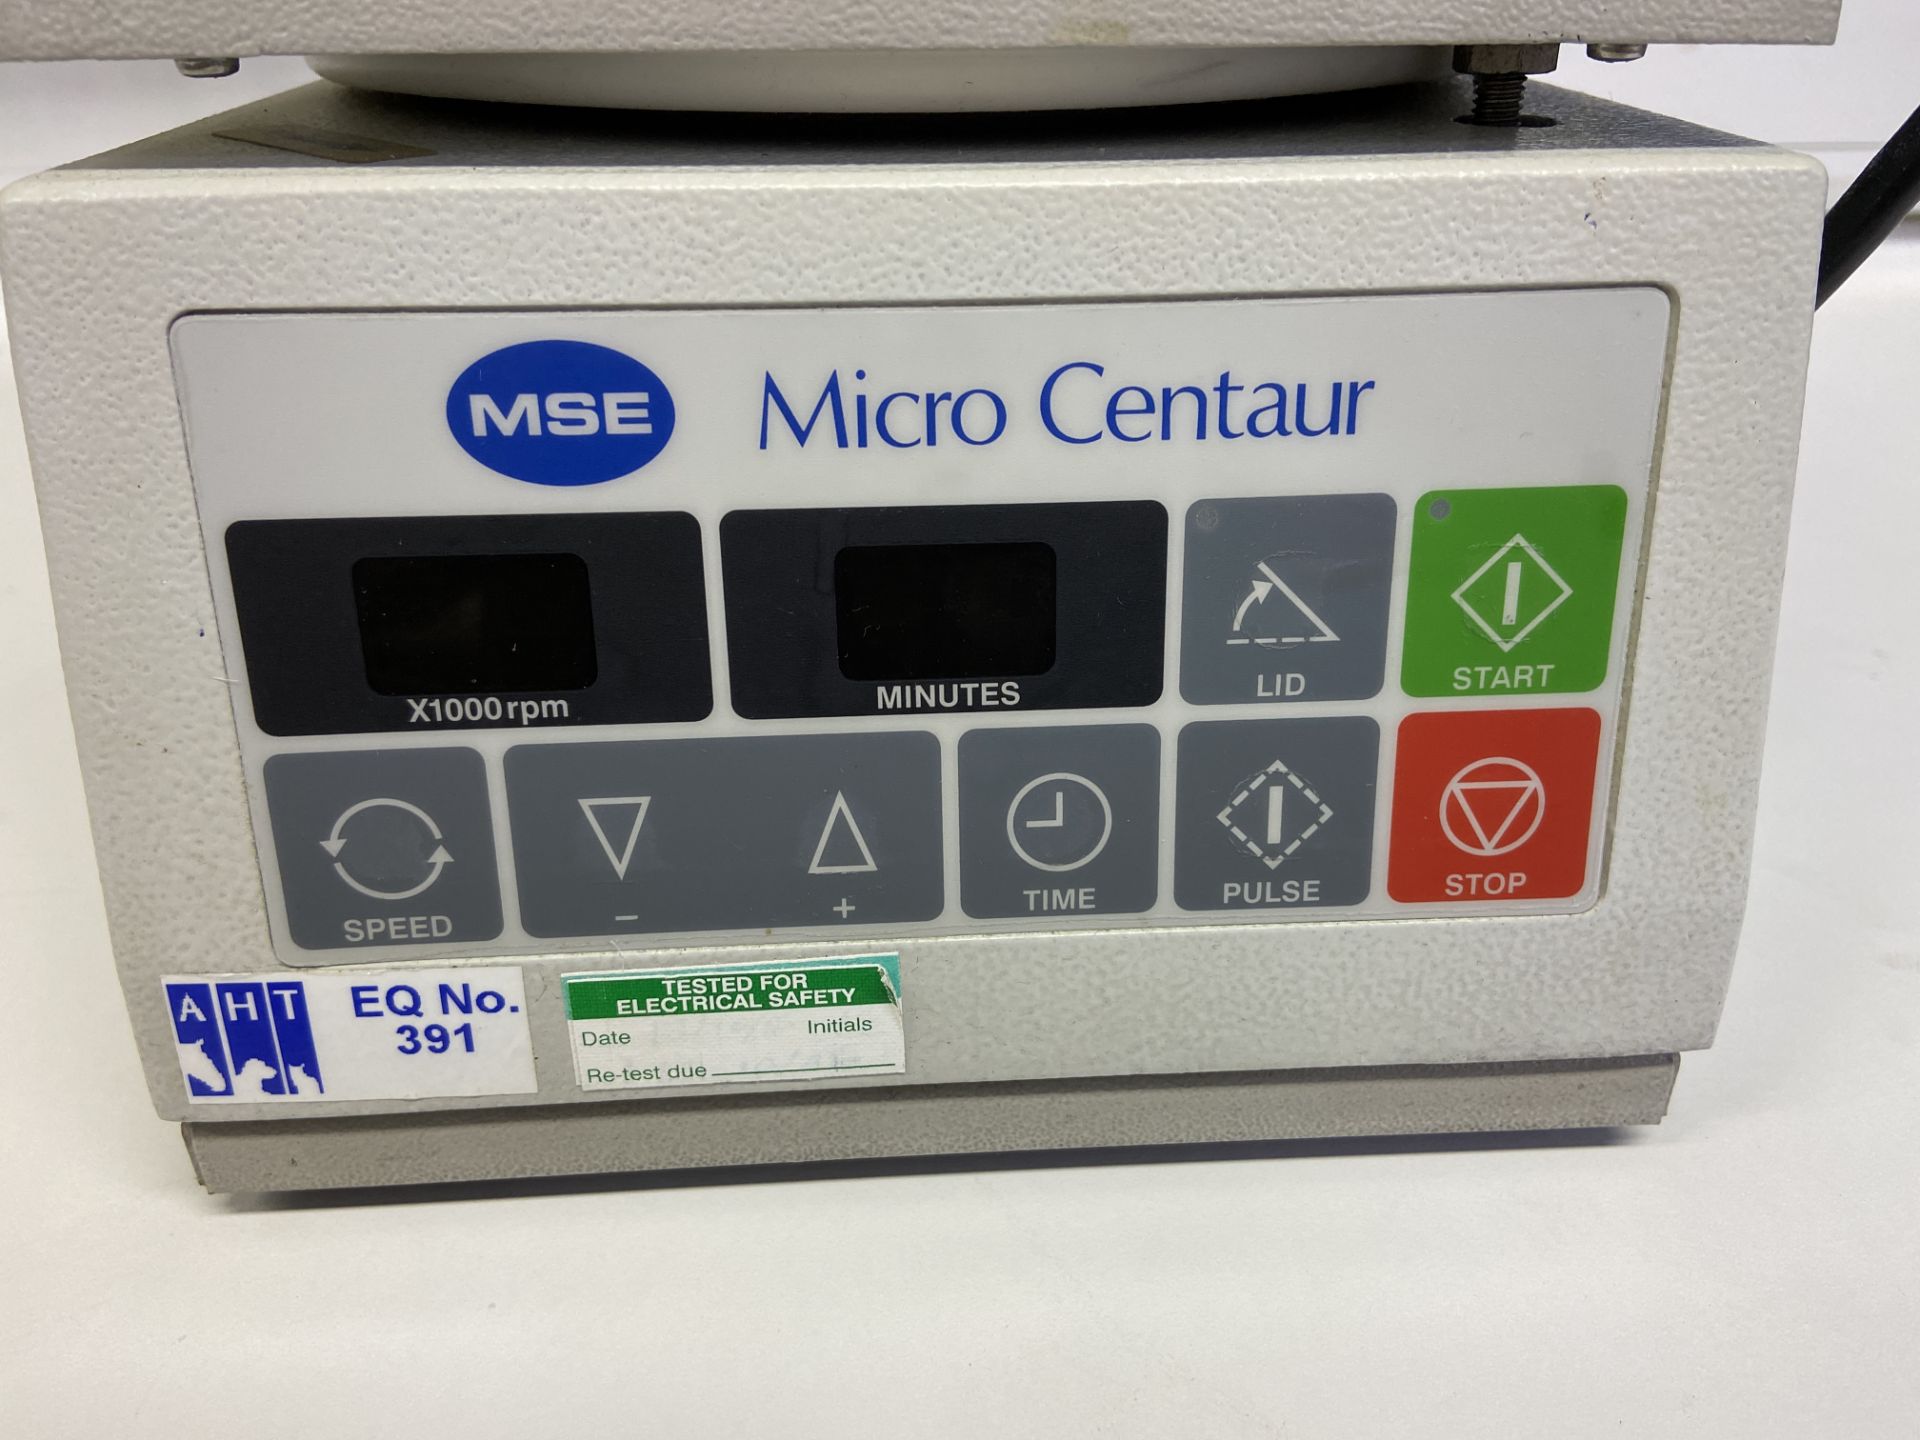 Sanyo MSE Micro Centaur benchtop centrifuge, Serial No. SG93/07/110, with 240v power cable - Image 2 of 2